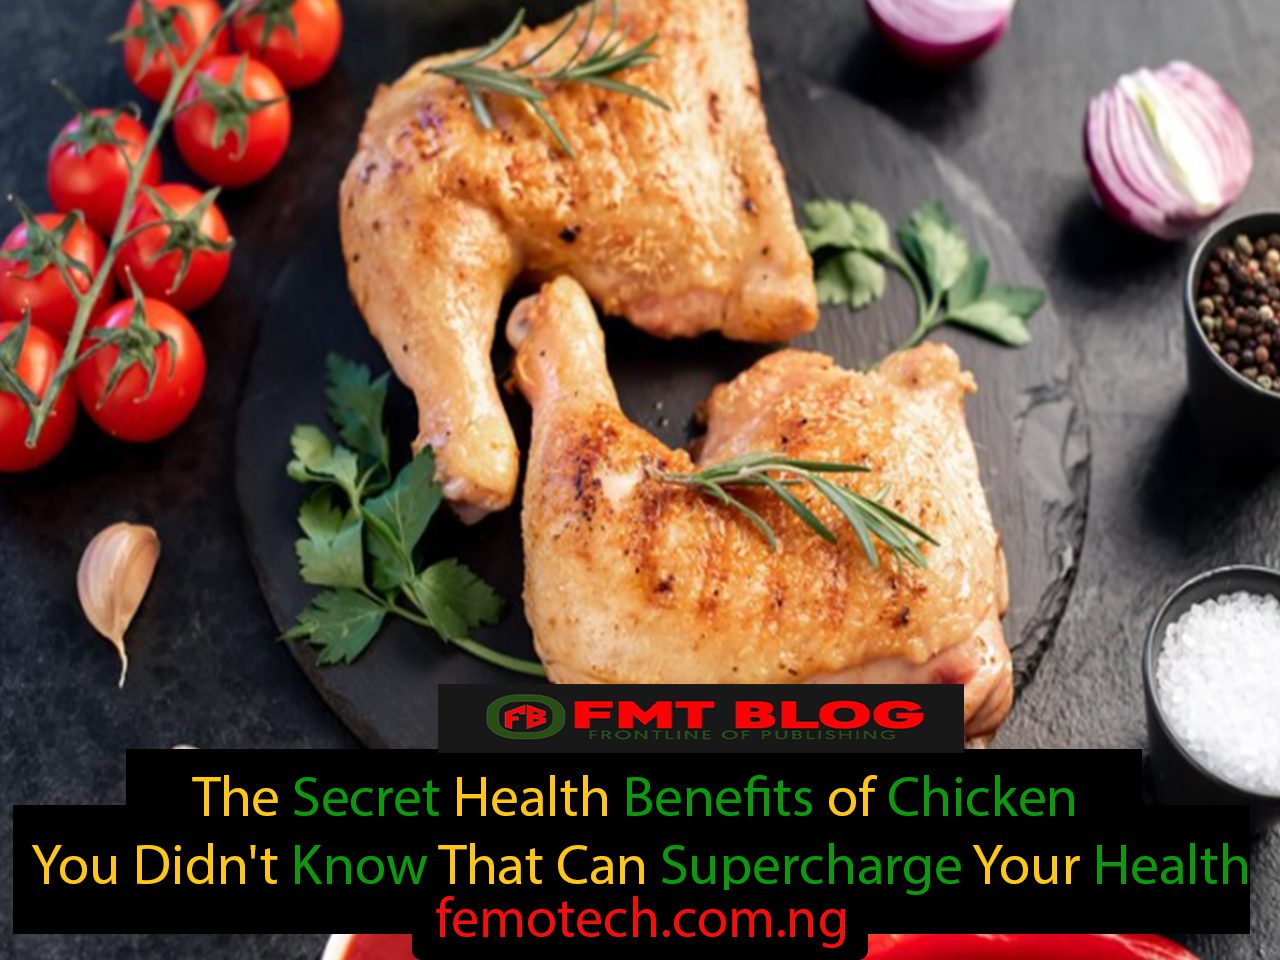 The Secret Health Benefits of Chicken You Didn’t Know That Can Supercharge Your Health